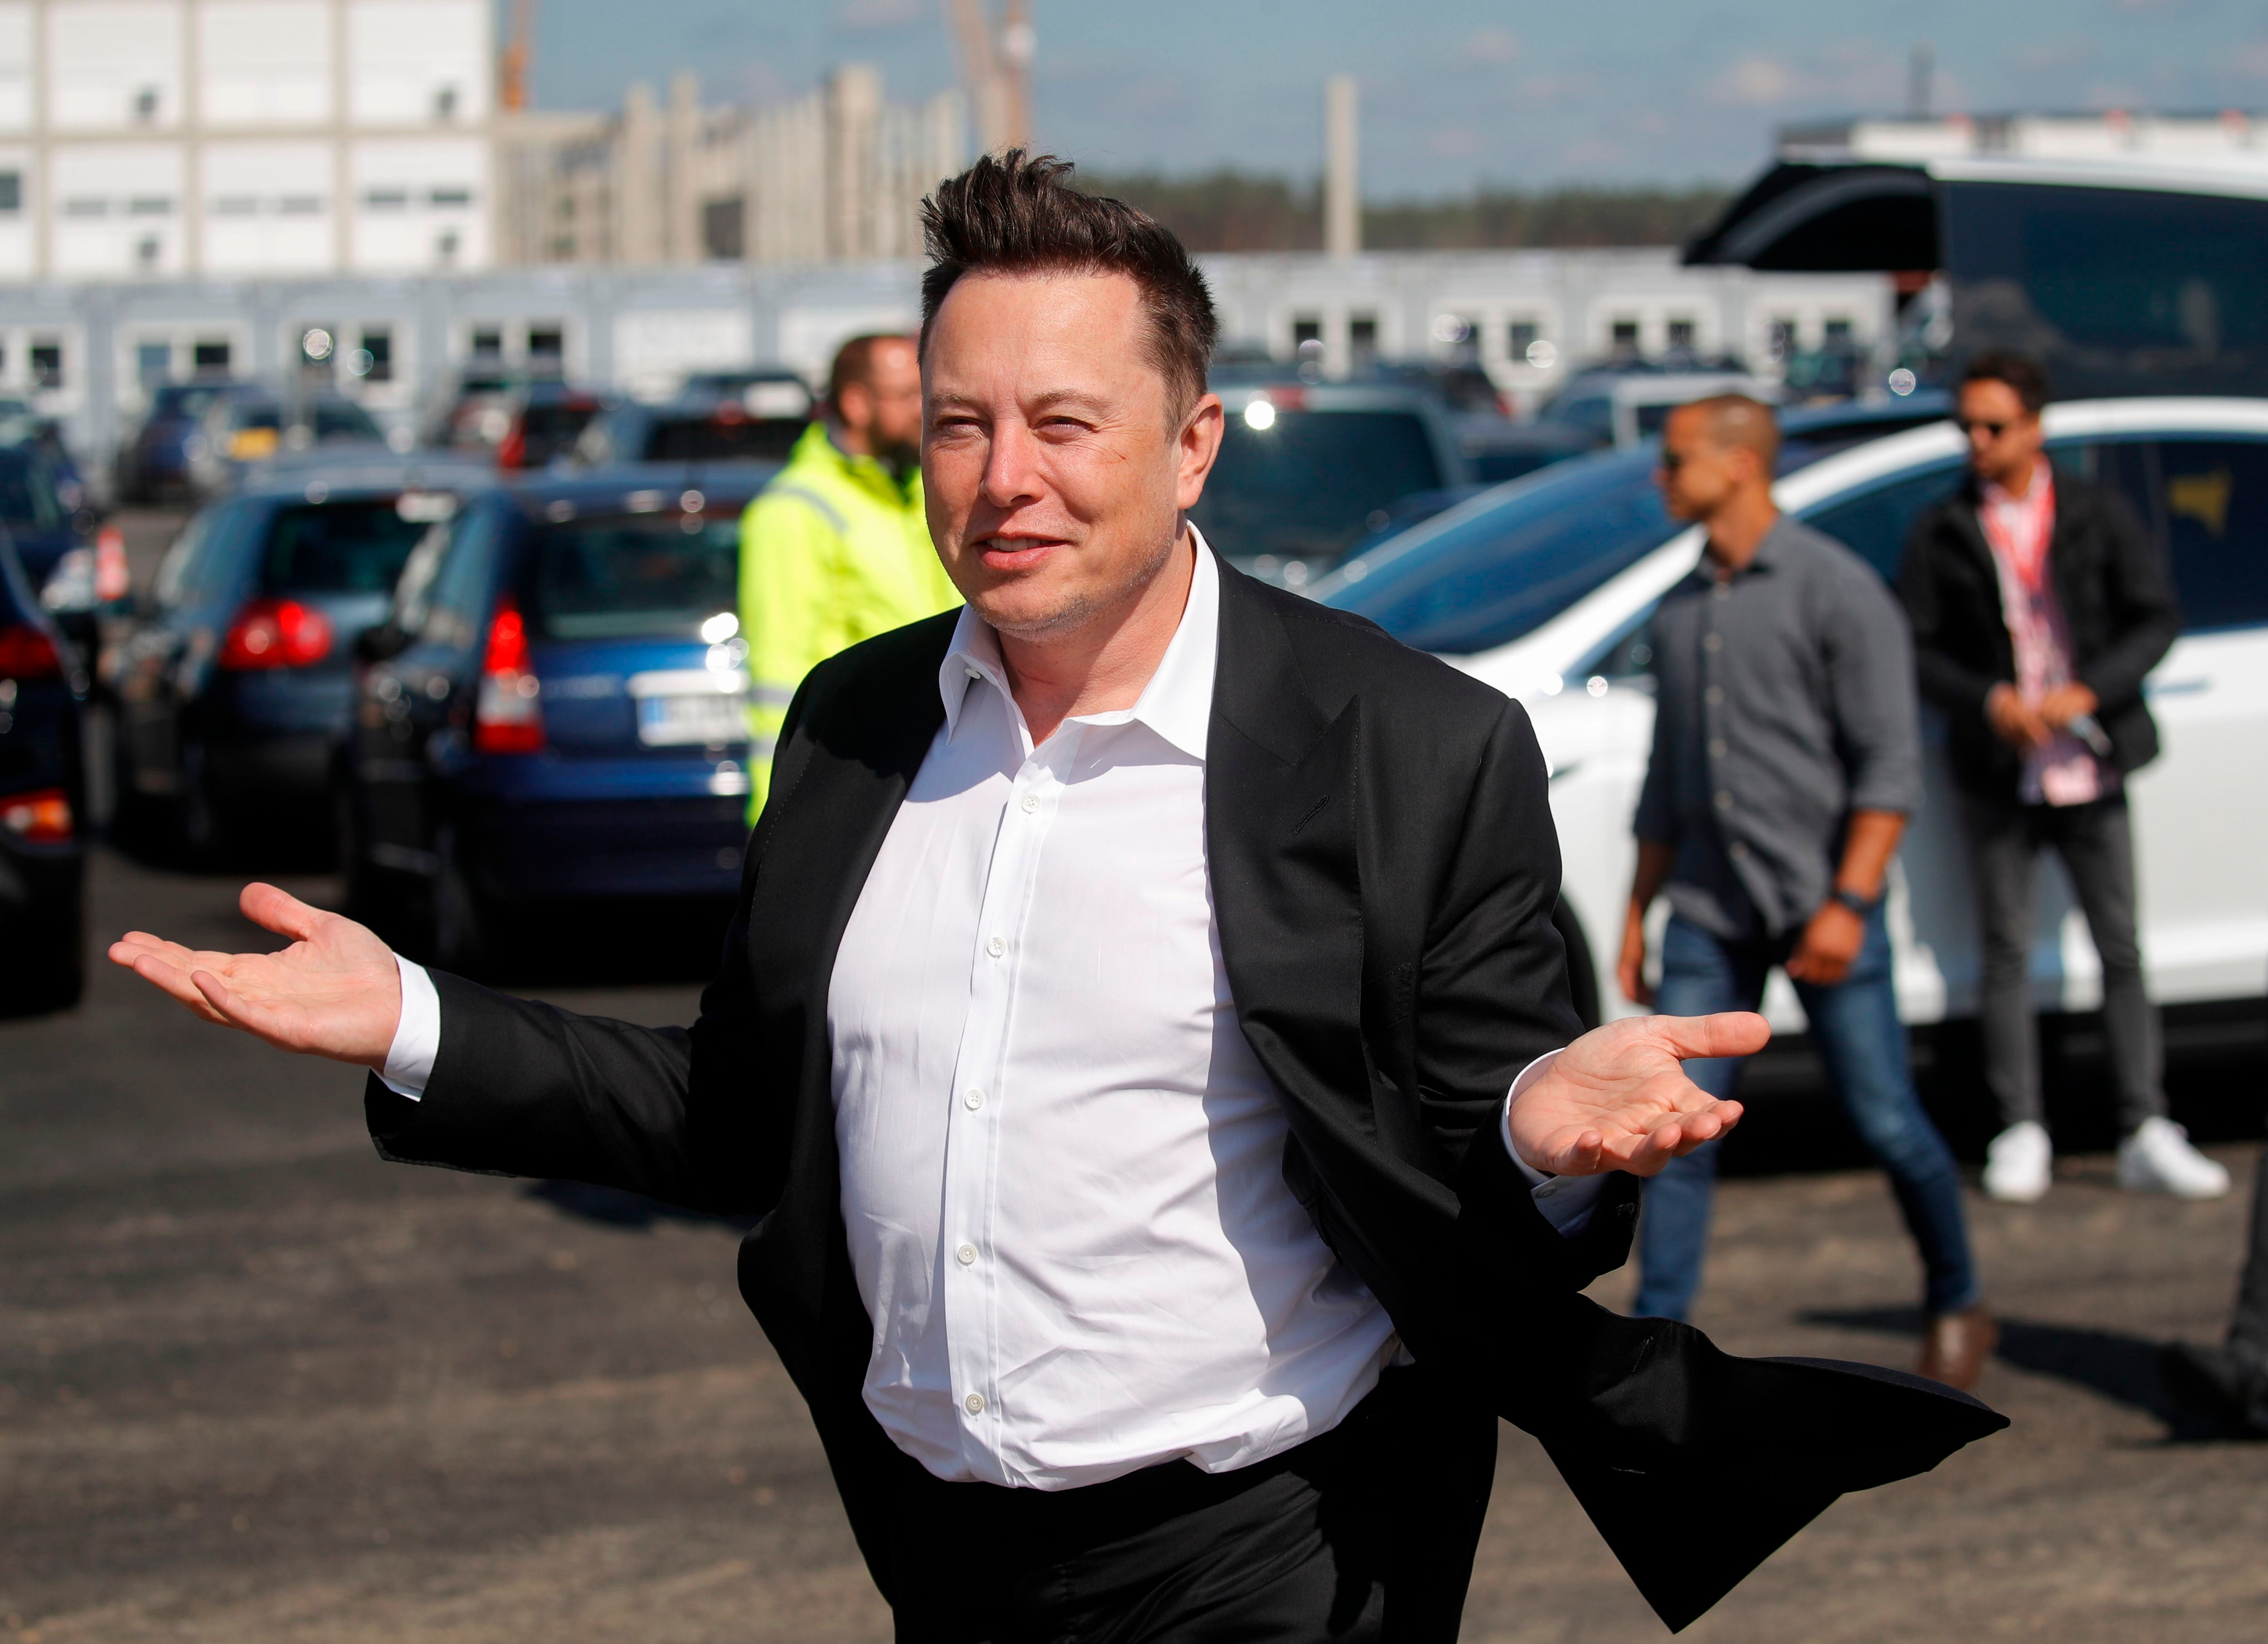 Elon Musk warns staff stock price could get ‘crushed like a souffle under a sledgehammer'